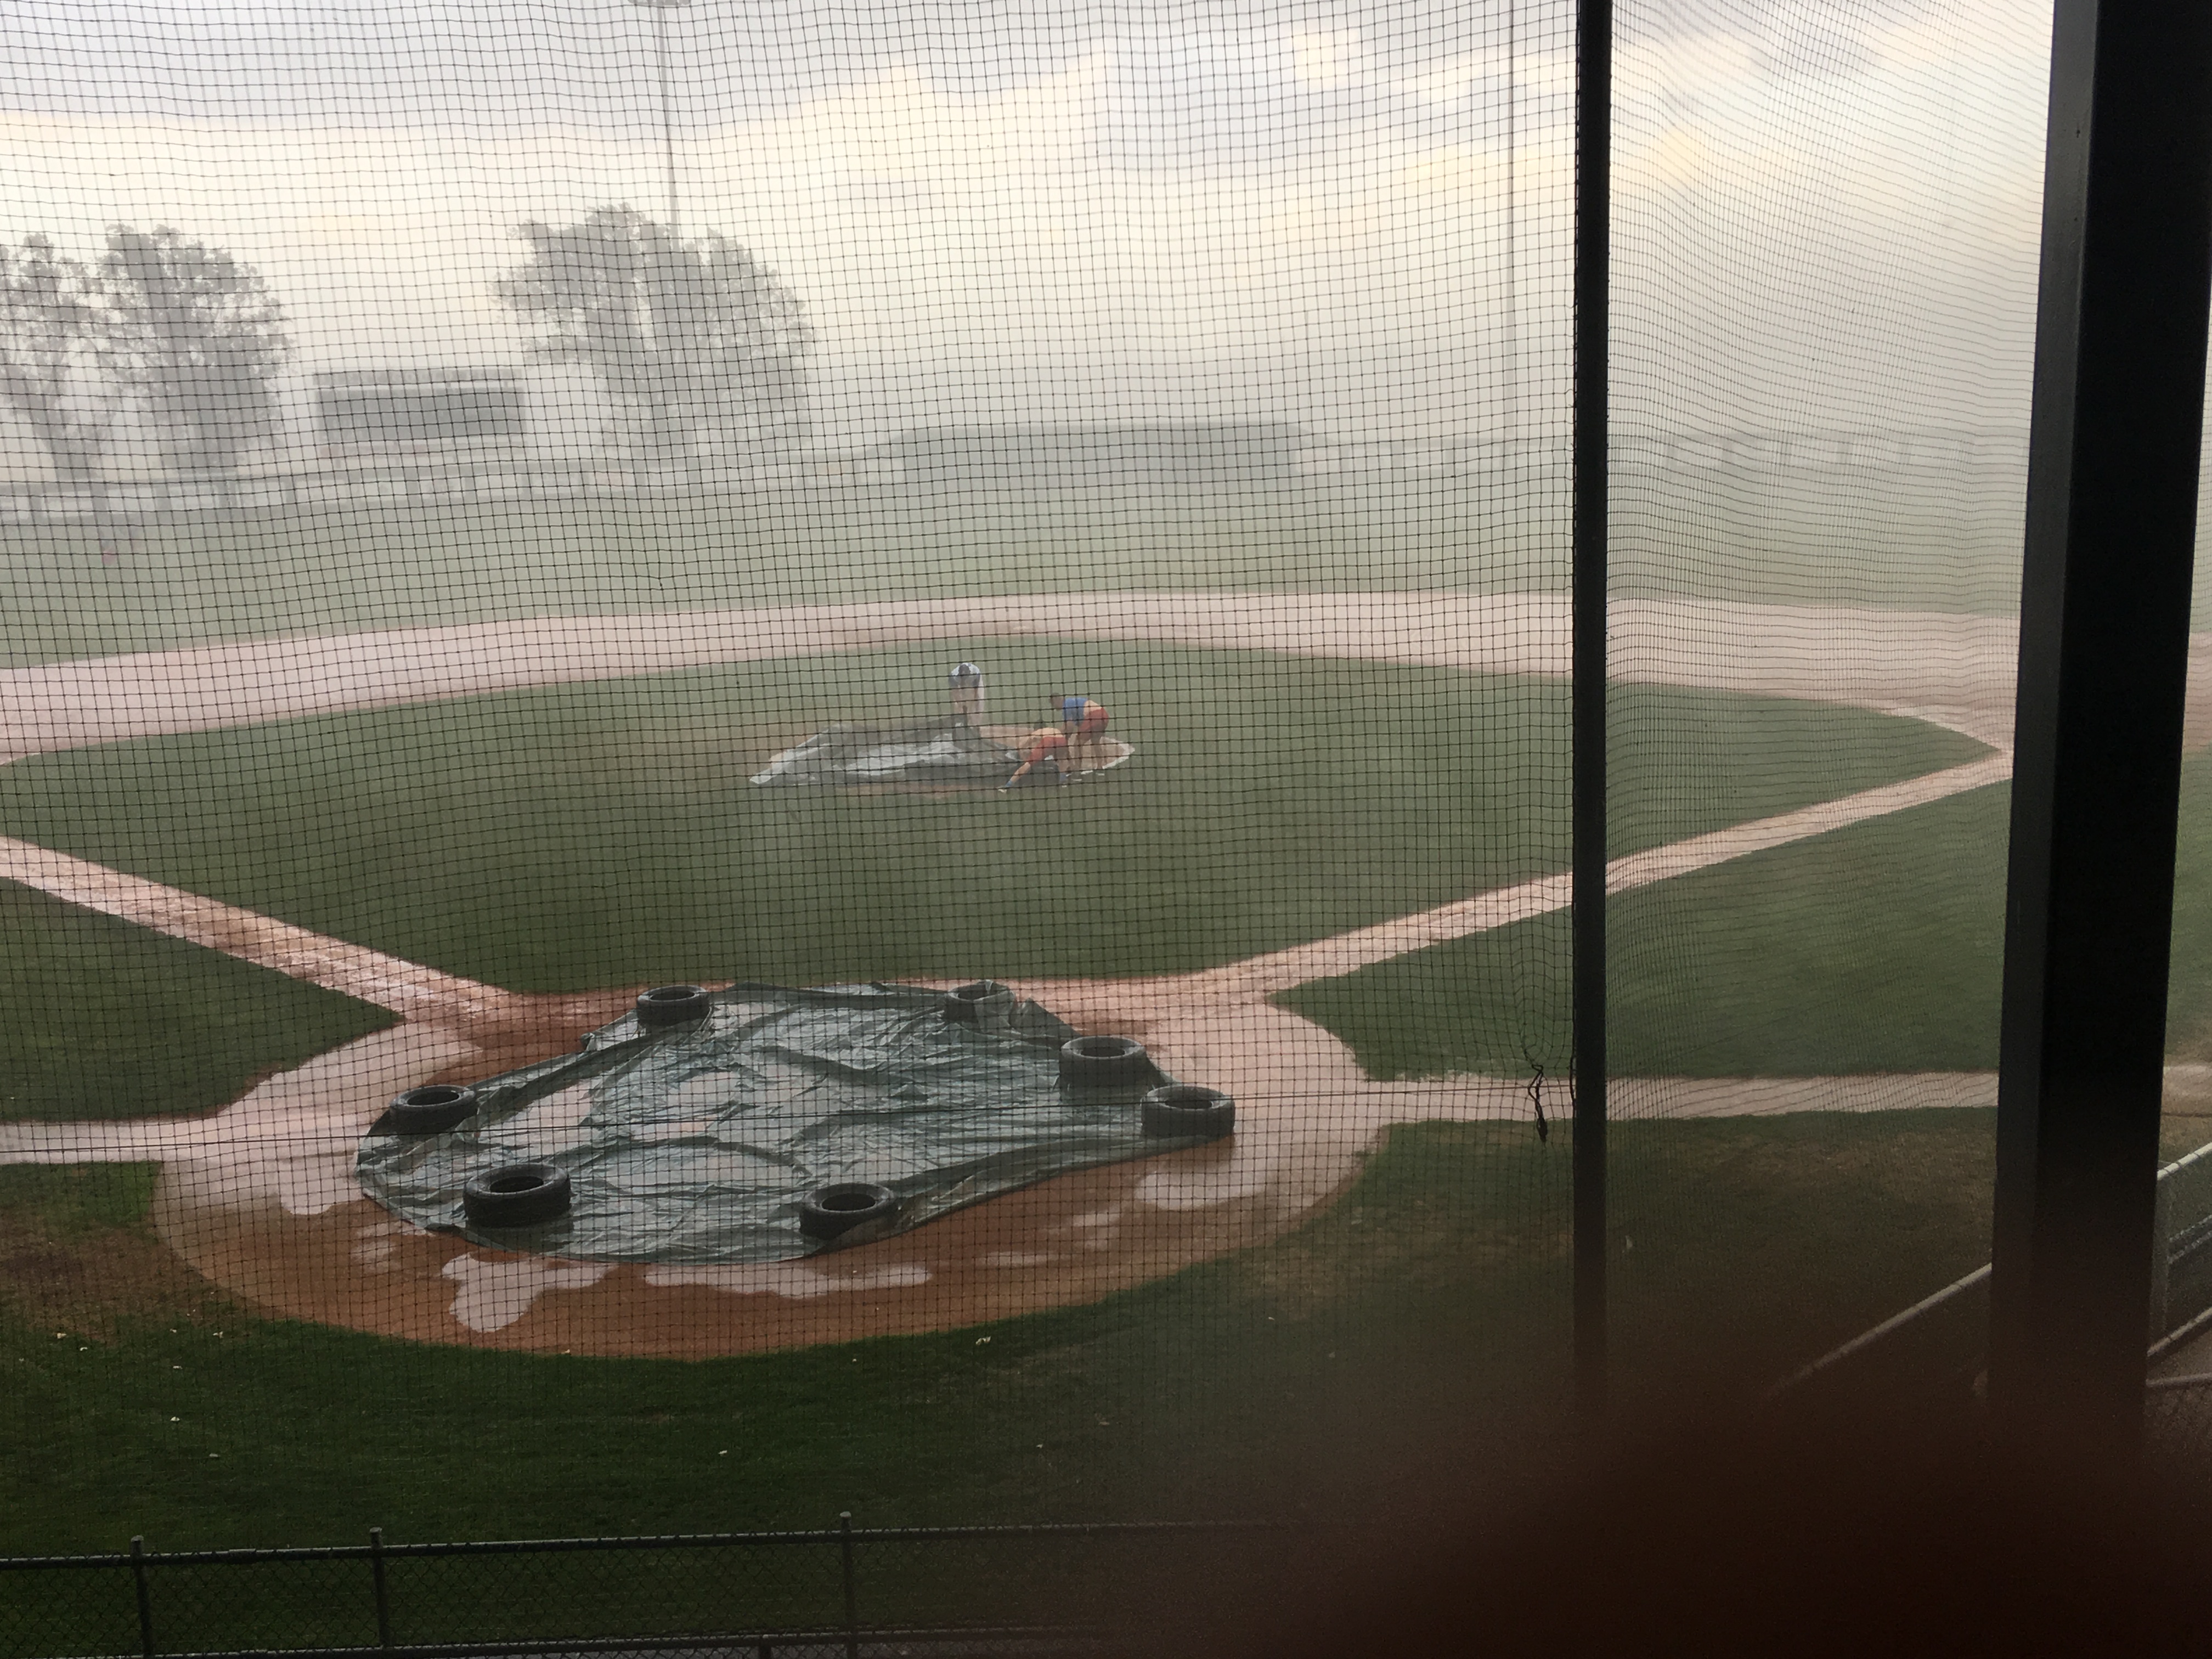 Bee Jays Rained Out: Play at 6 Saturday